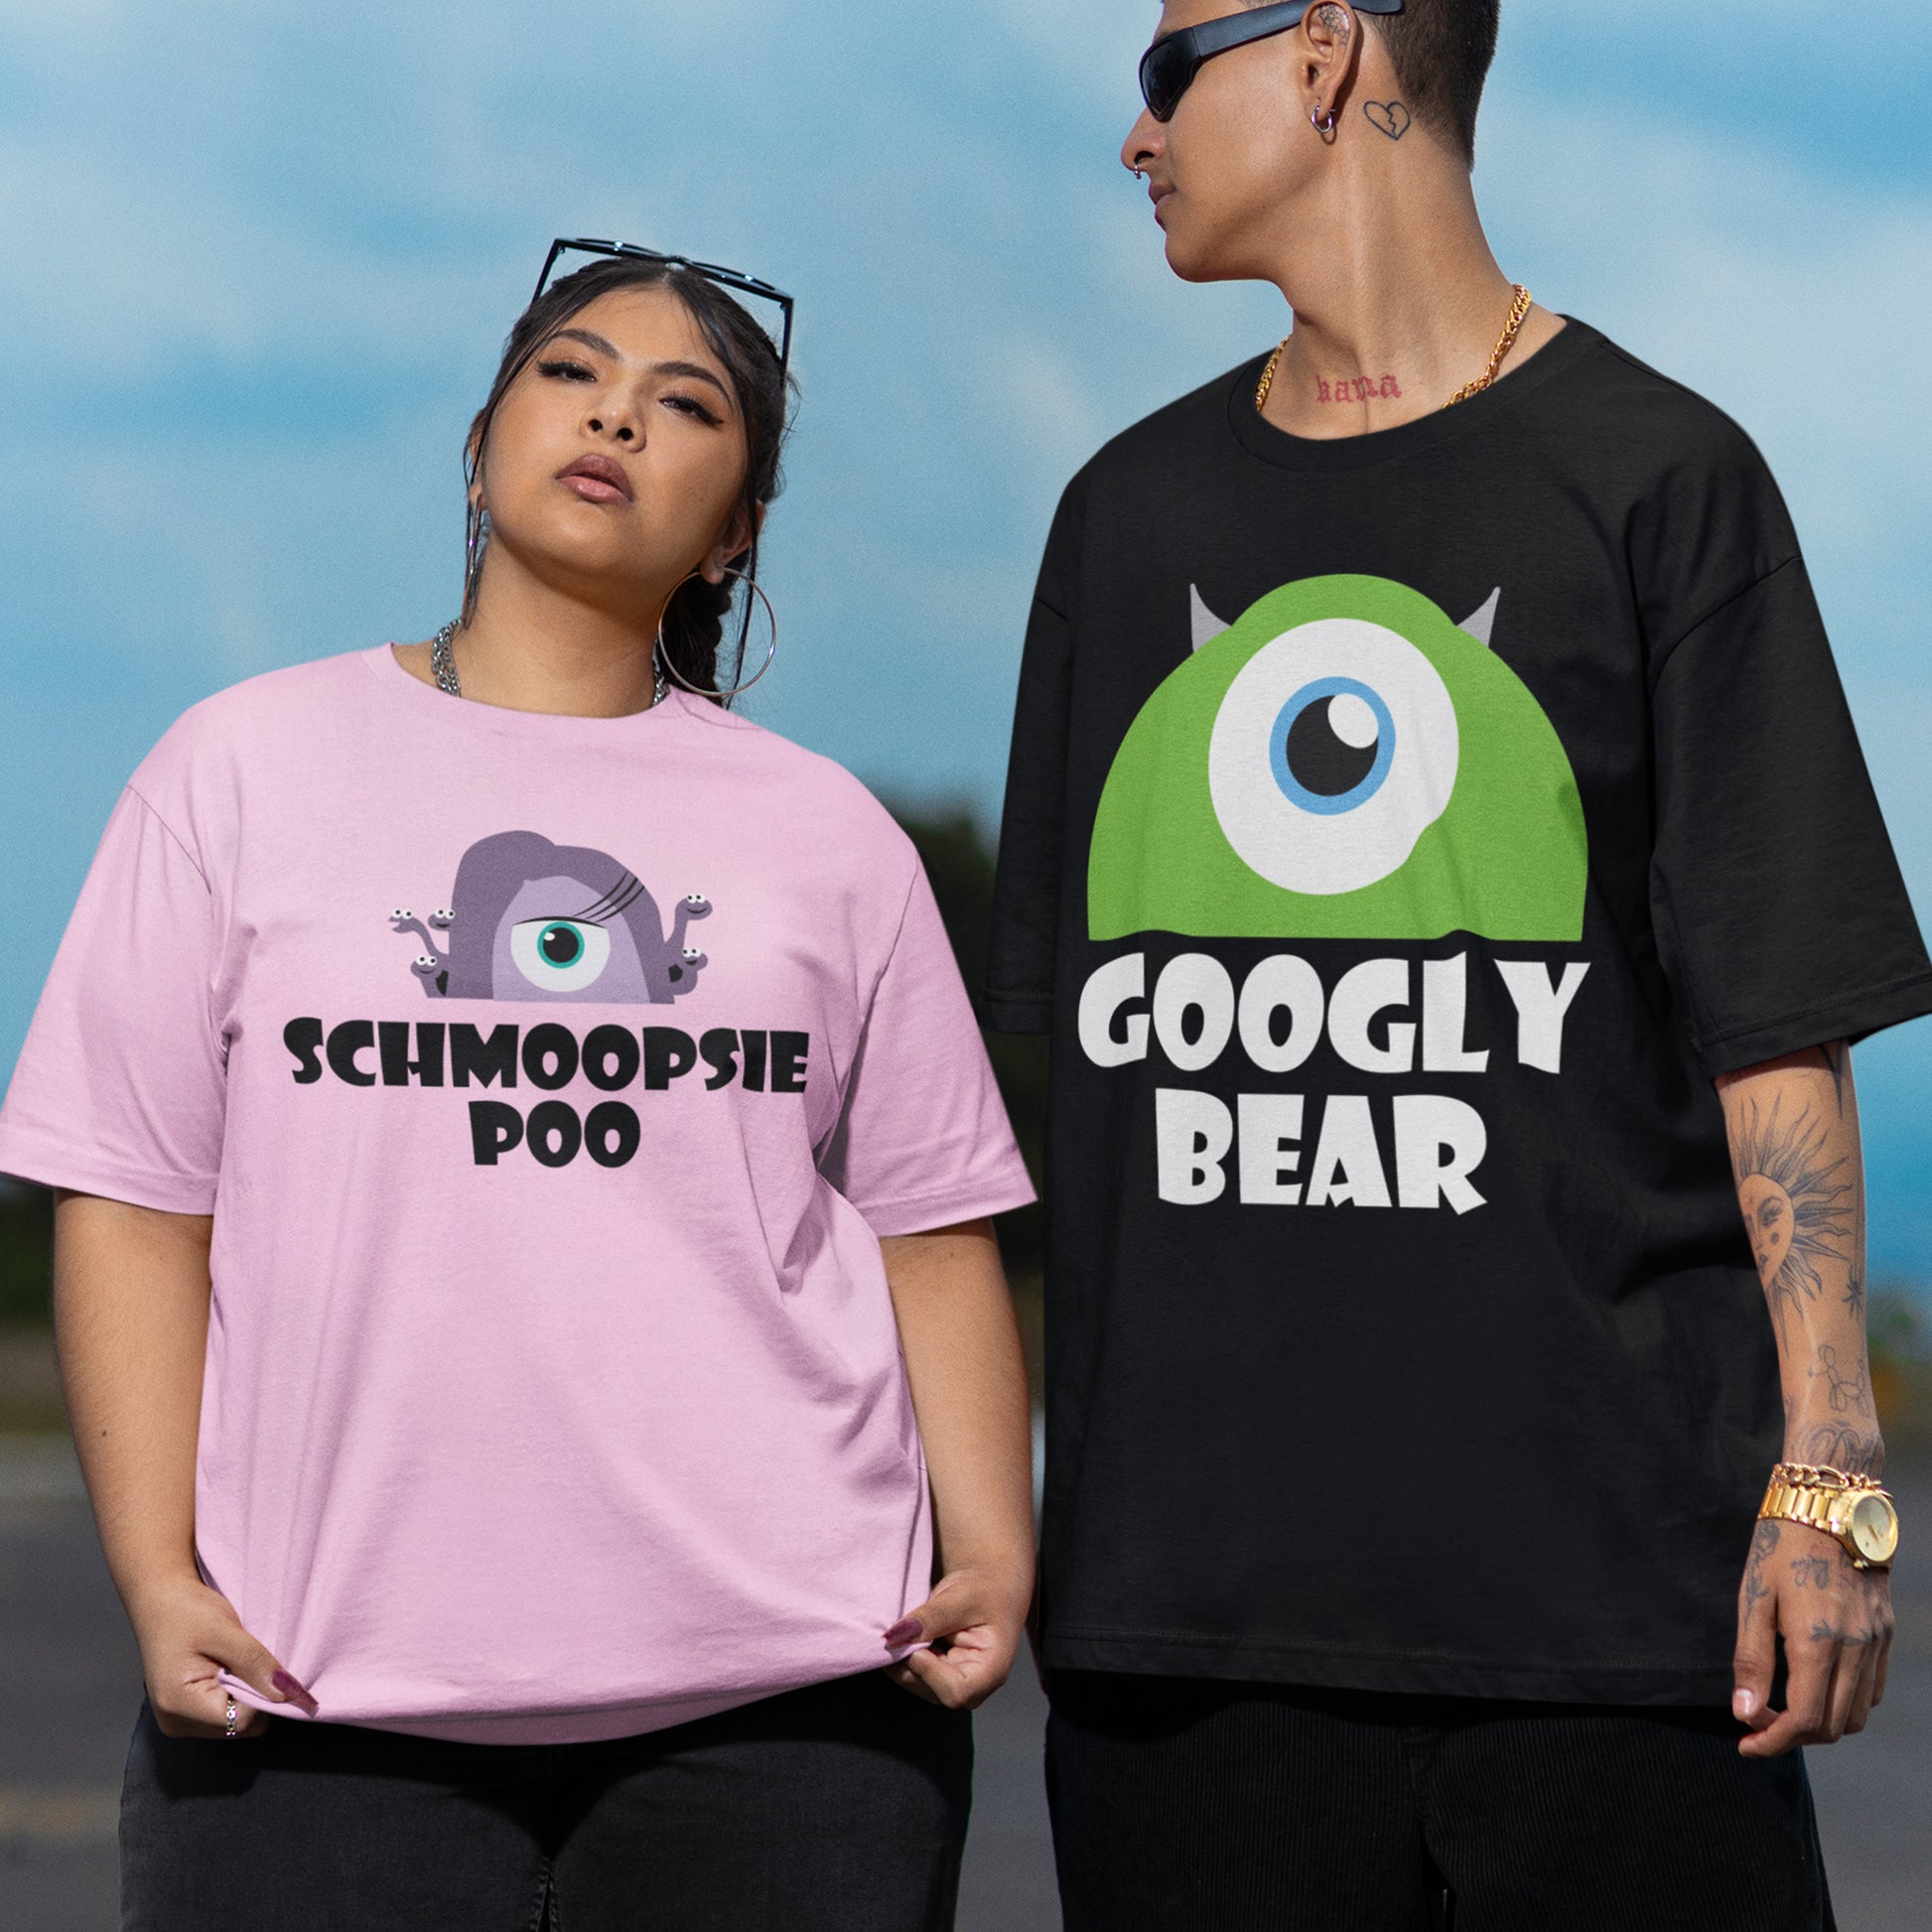 Googly Bear and Schmoopsie Poo Couples Valentine Day T Shirts